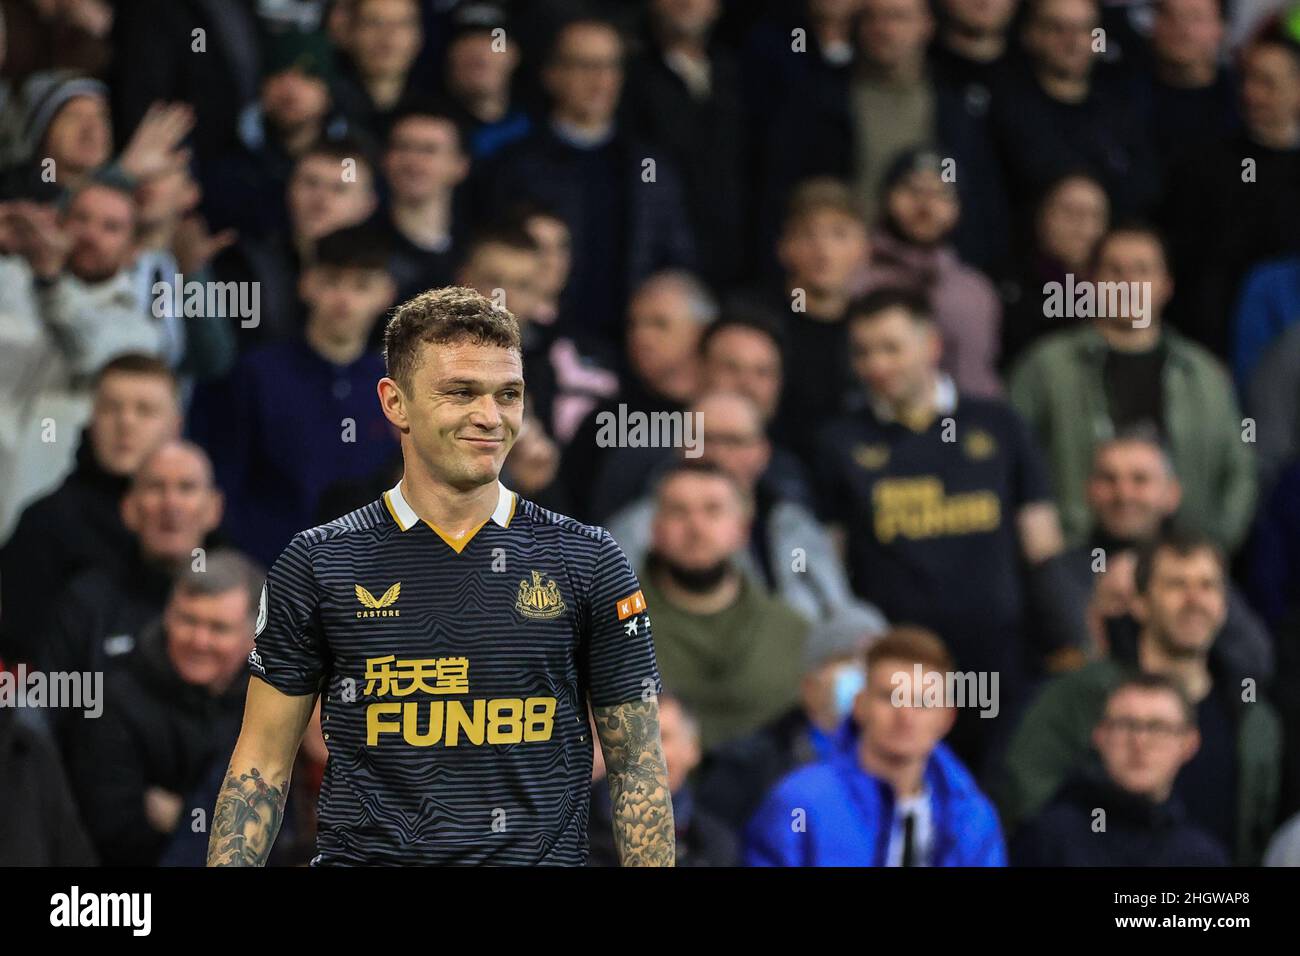 Leeds, UK. 22nd Jan, 2022. Kieran Trippier #15 of Newcastle United during the gameduring the Premier League fixture Leeds United vs Newcastle United at Elland Road, Leeds, UK, 22nd January 2022 Credit: News Images /Alamy Live News Stock Photo